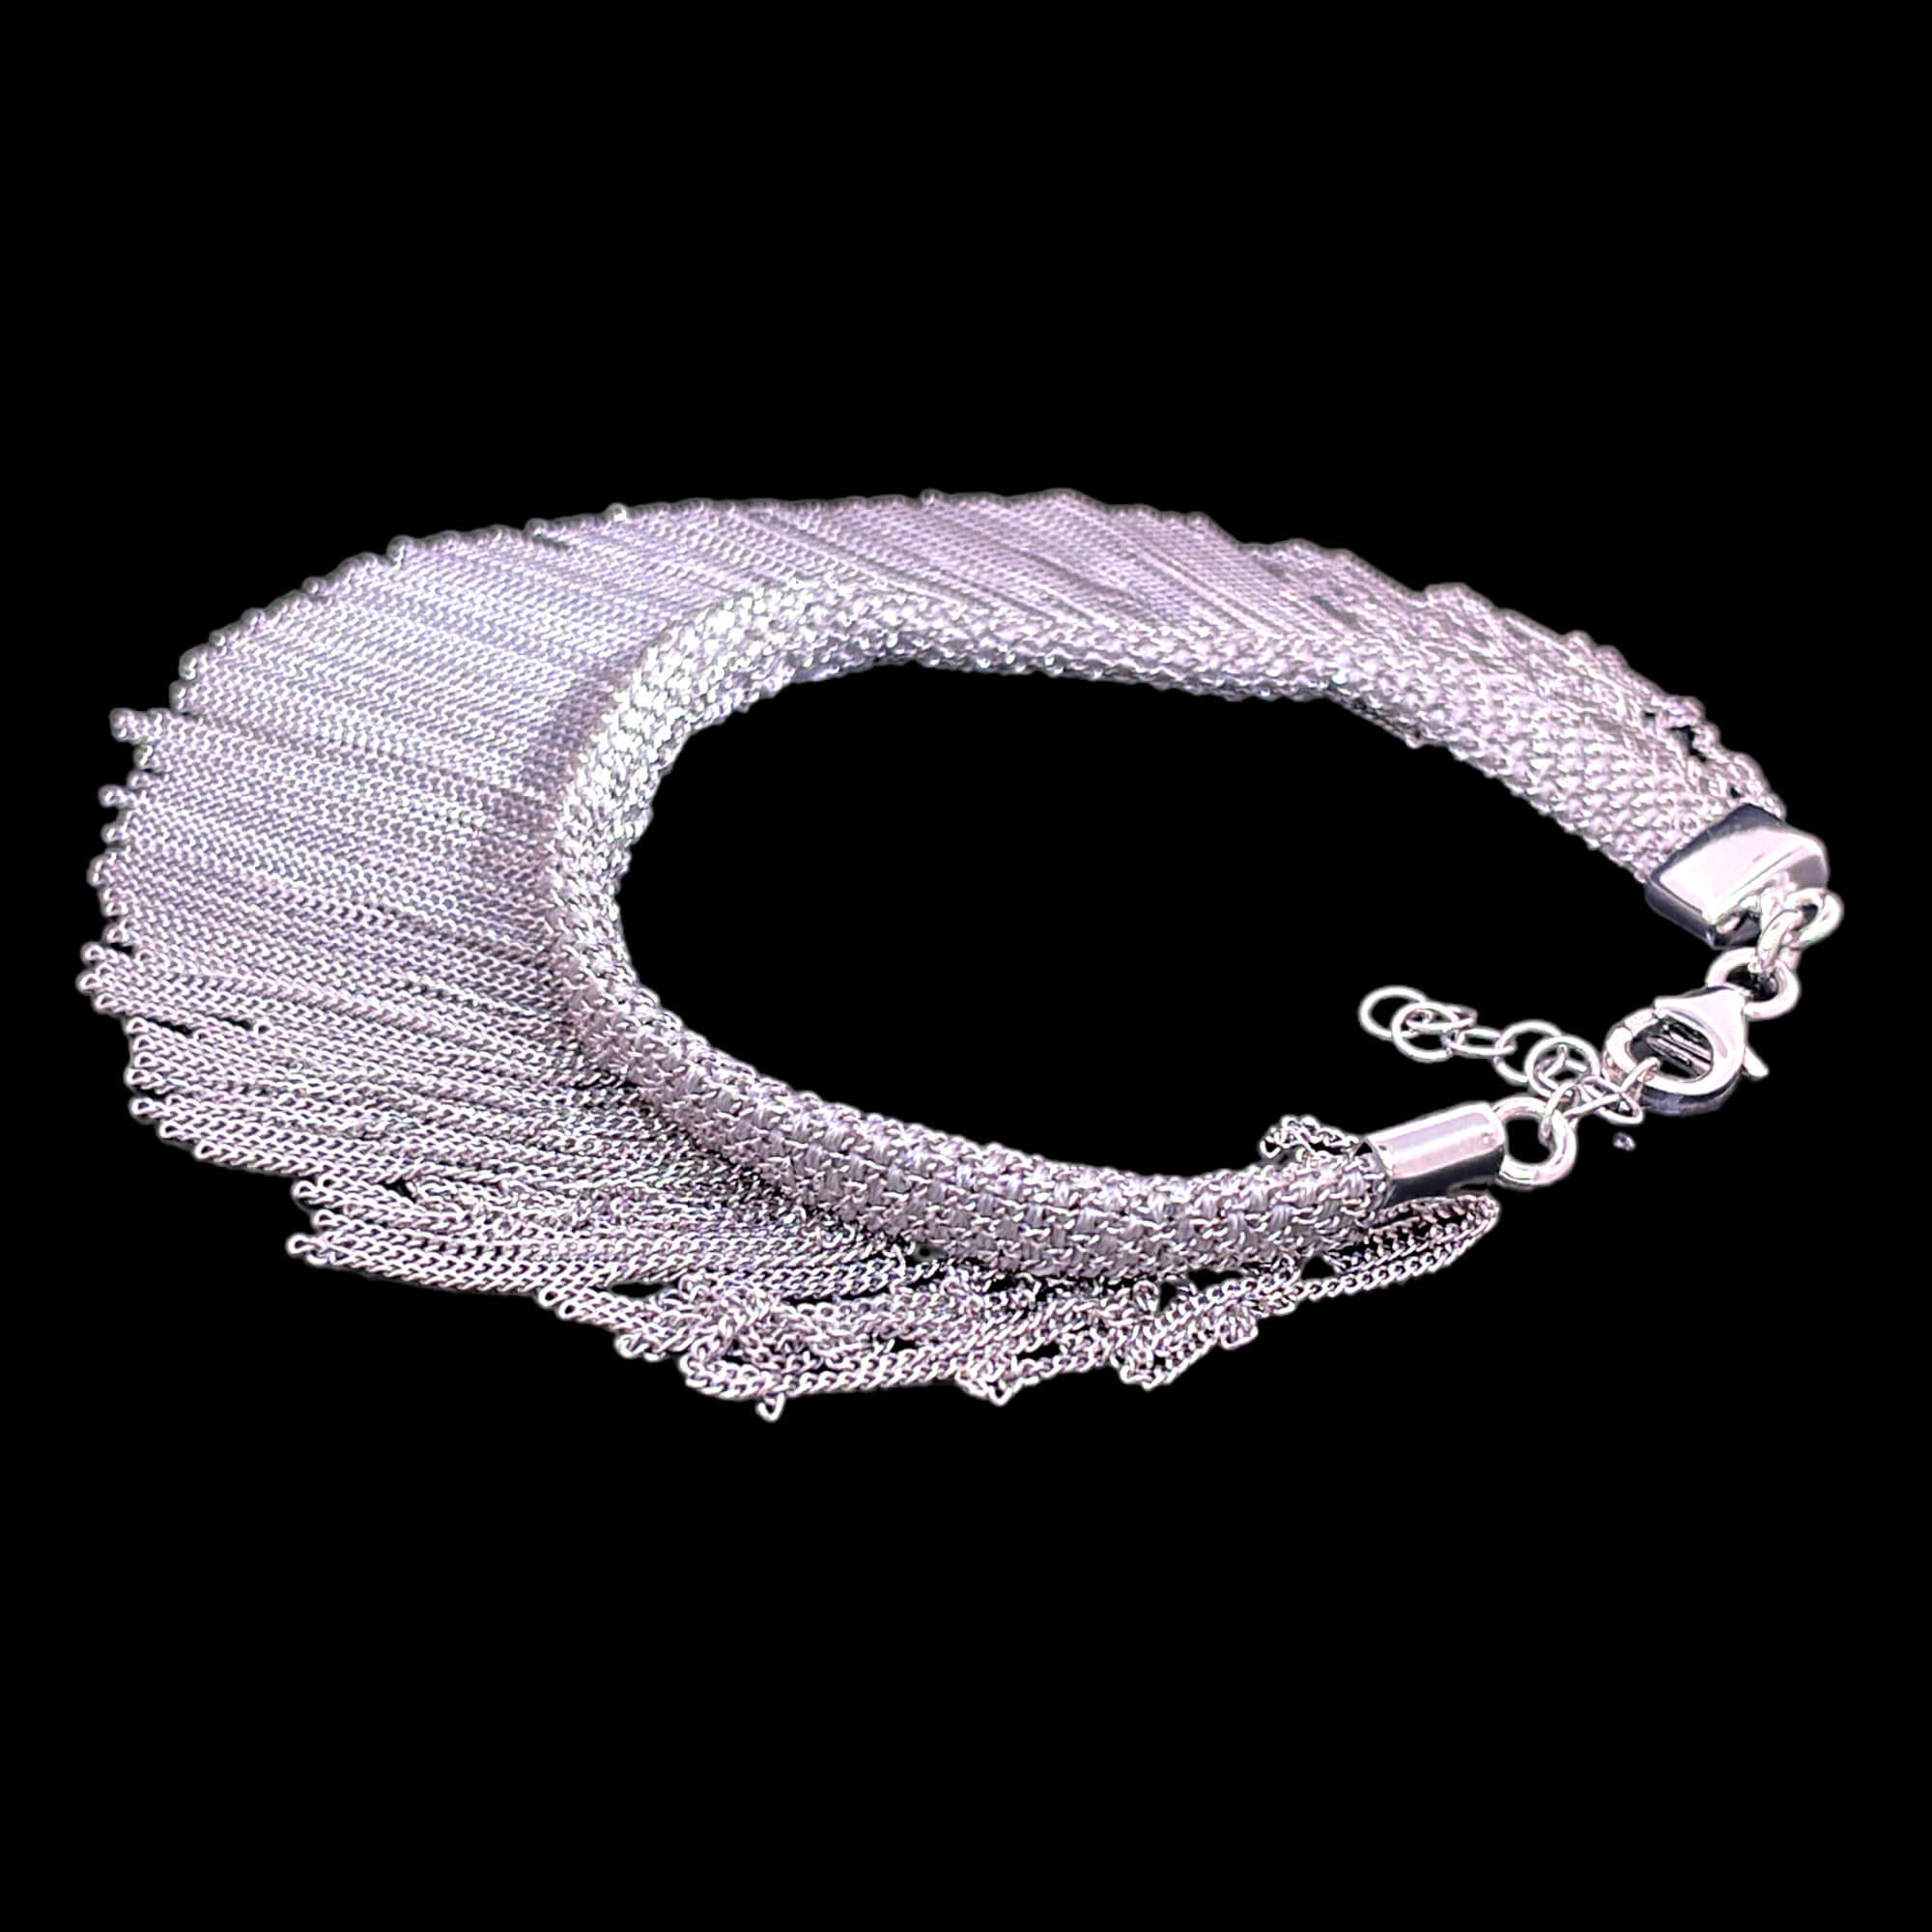 Silver colored bracelet with hanging chains